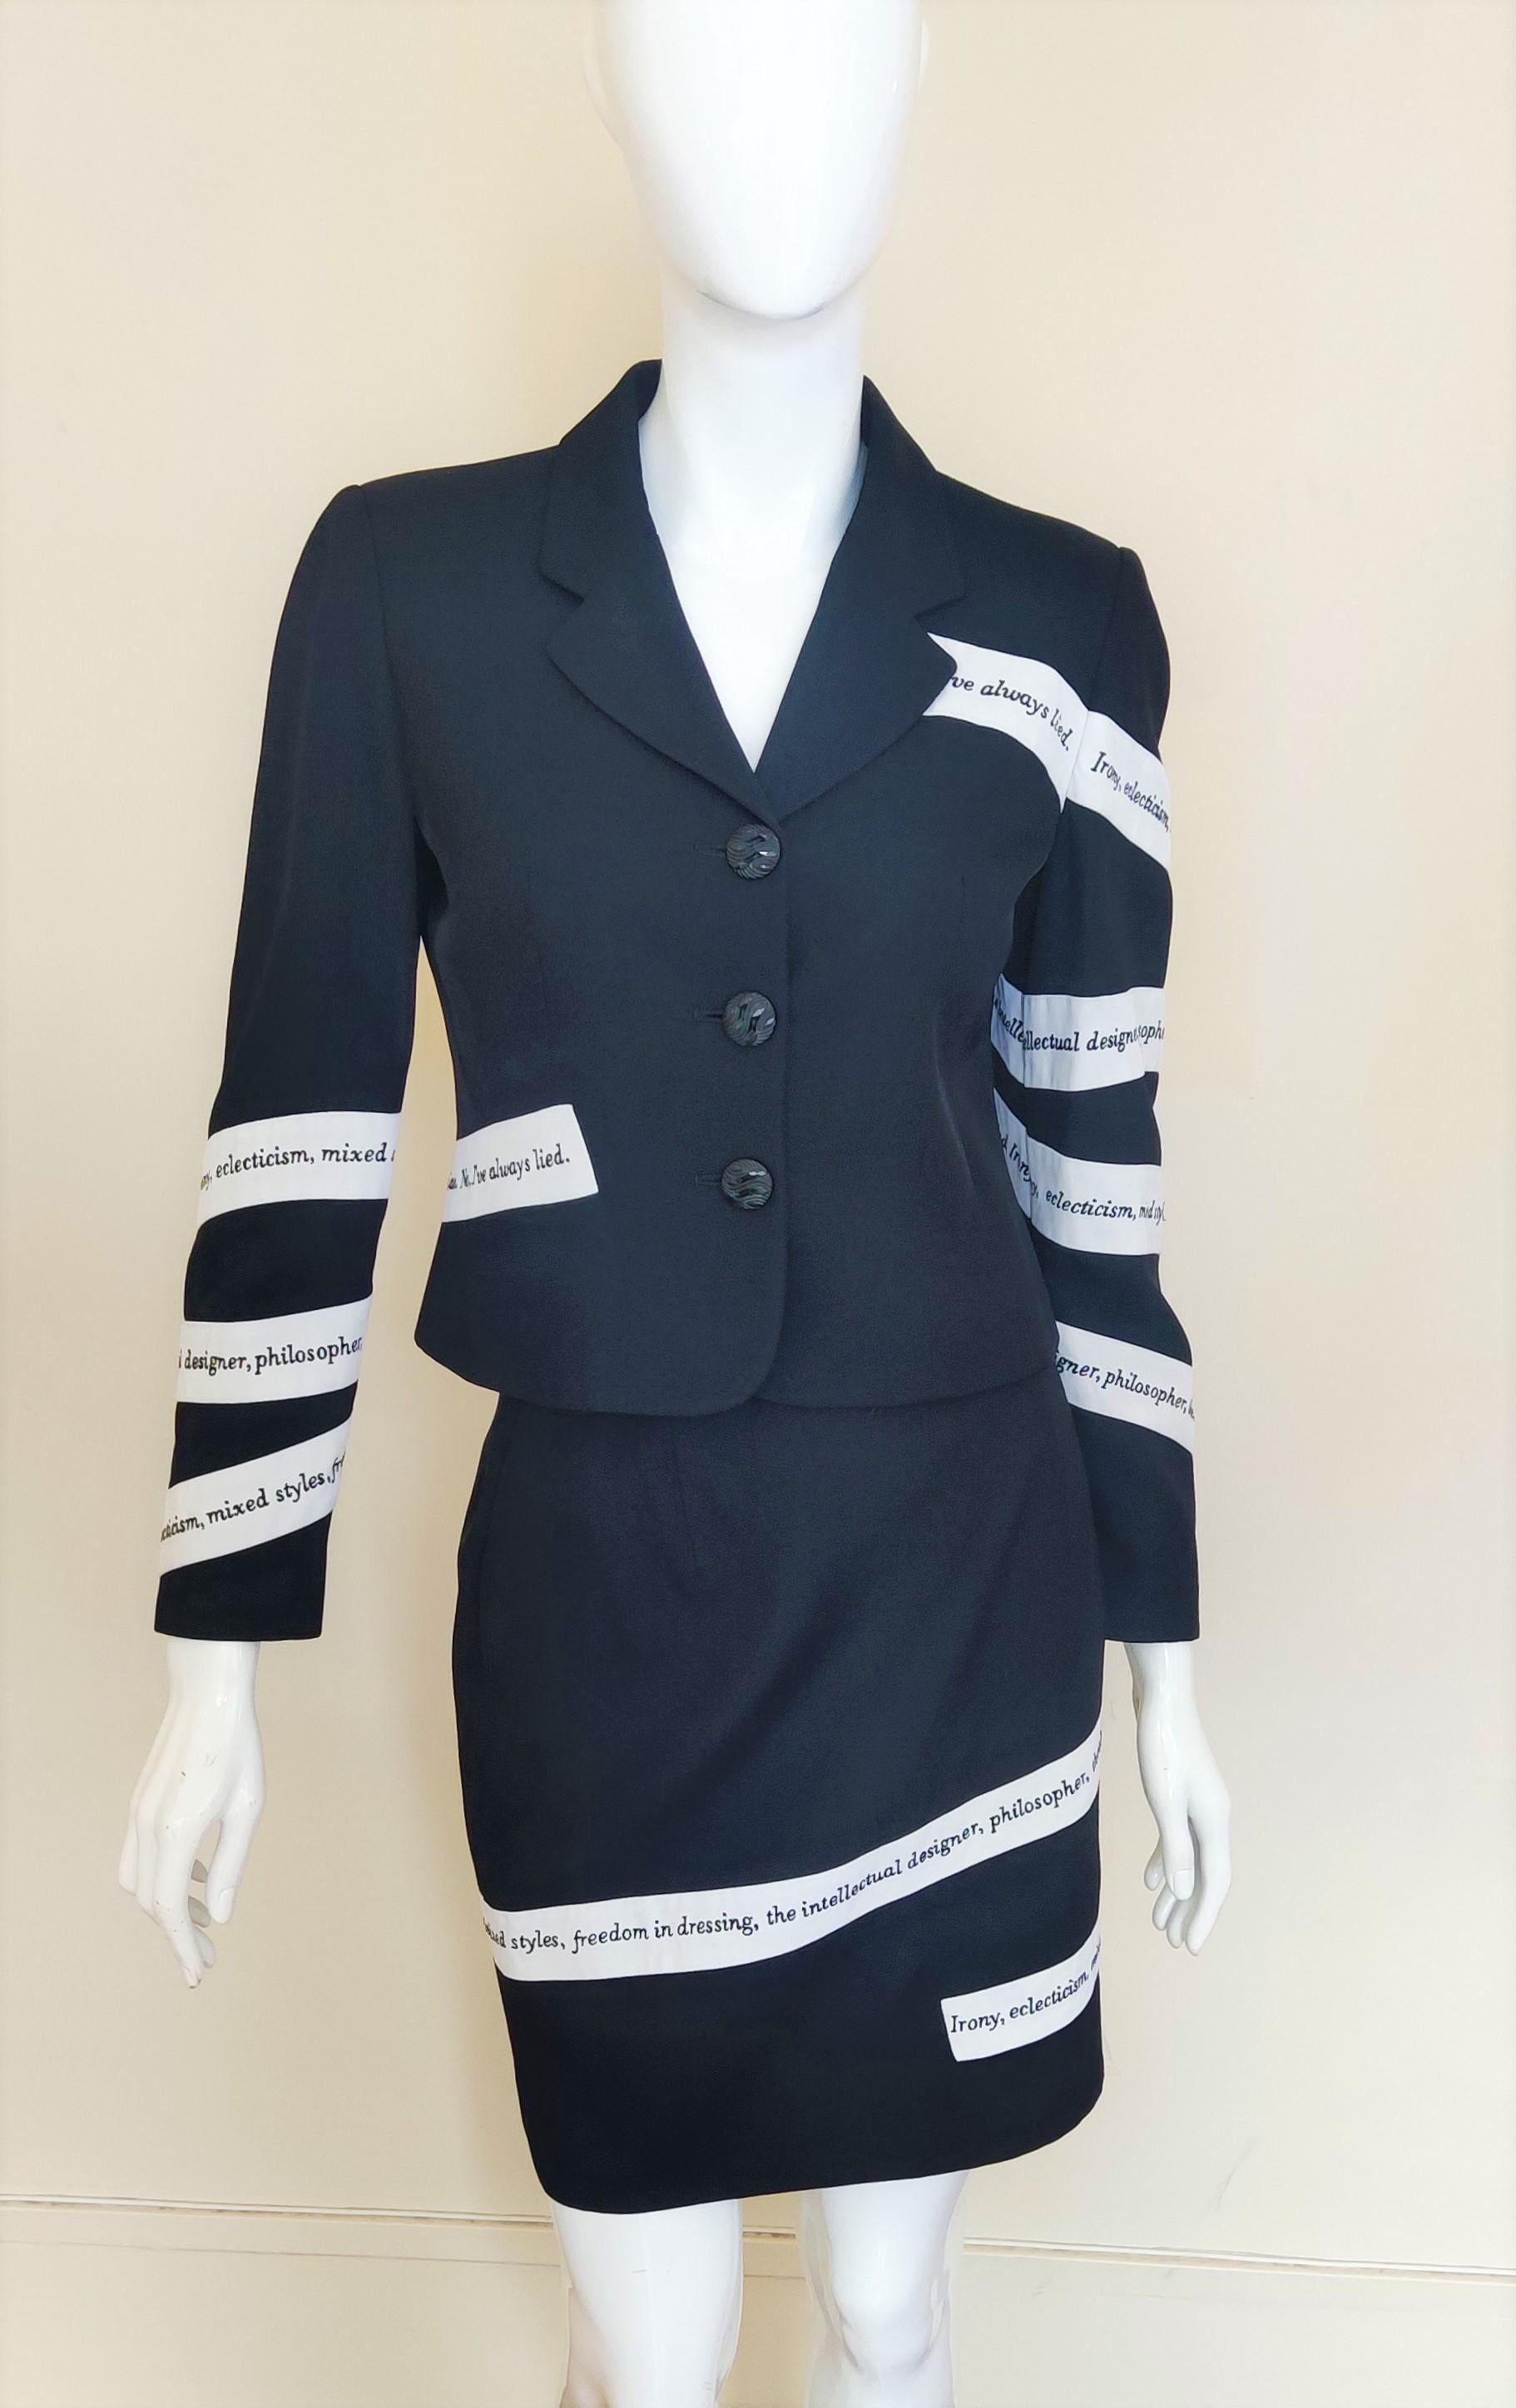 Moschino Cheap and Chic Irony Text Tape Vintage Couture Black White Dress Suit In Excellent Condition For Sale In PARIS, FR